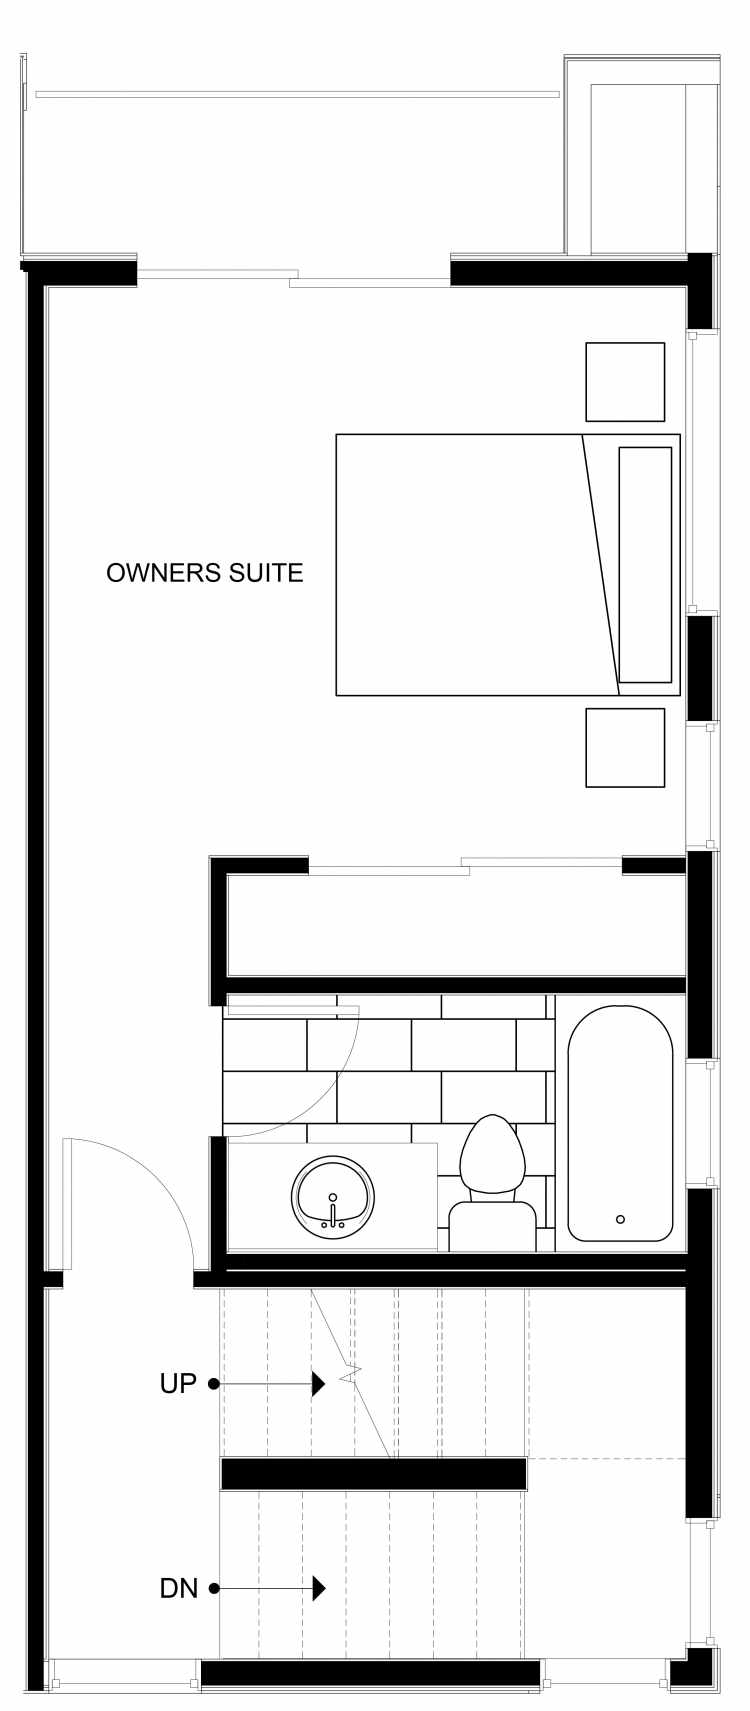 Fourth Floor Plan of 1539 Grandview Pl E, One of the Grandview Townhomes in Capitol Hill